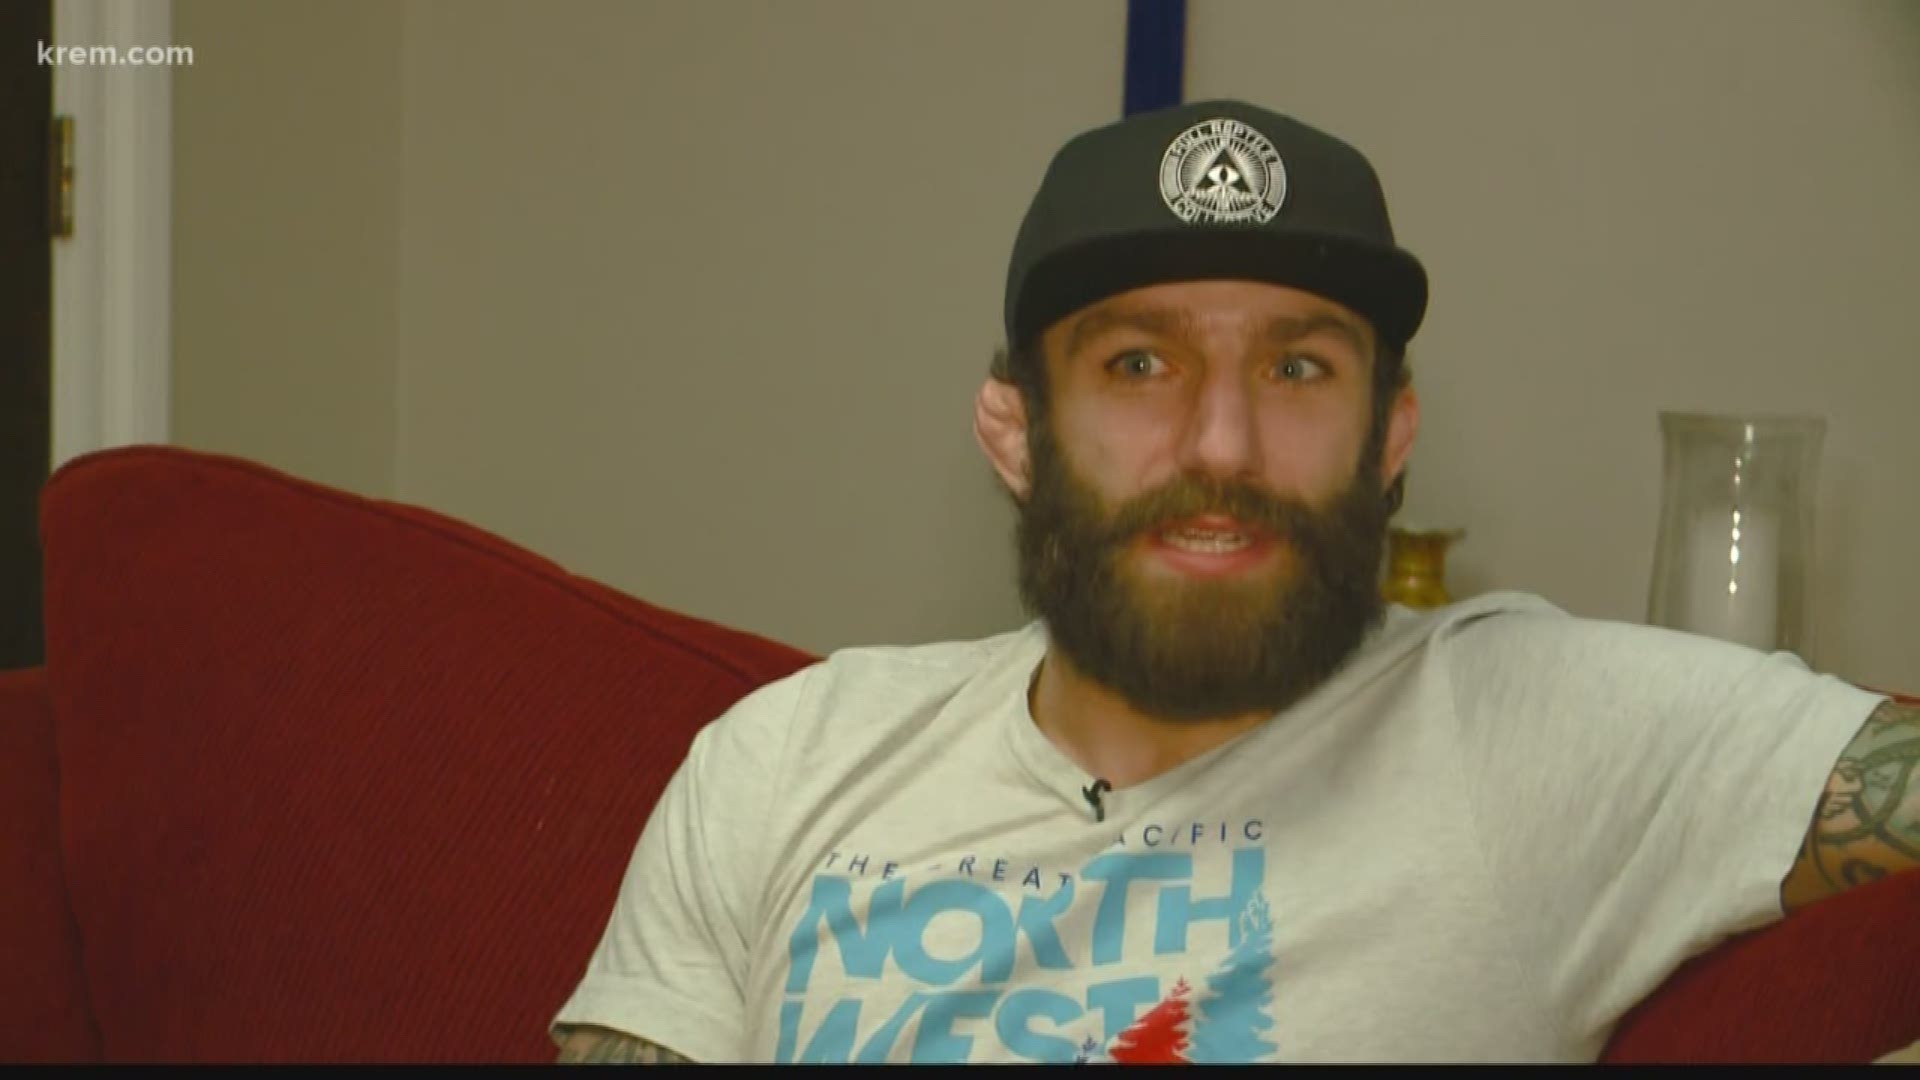 Chiesa hasn't lost a fight since moving up to Welterweight. He hopes a win Saturday will get him closer to a title fight.